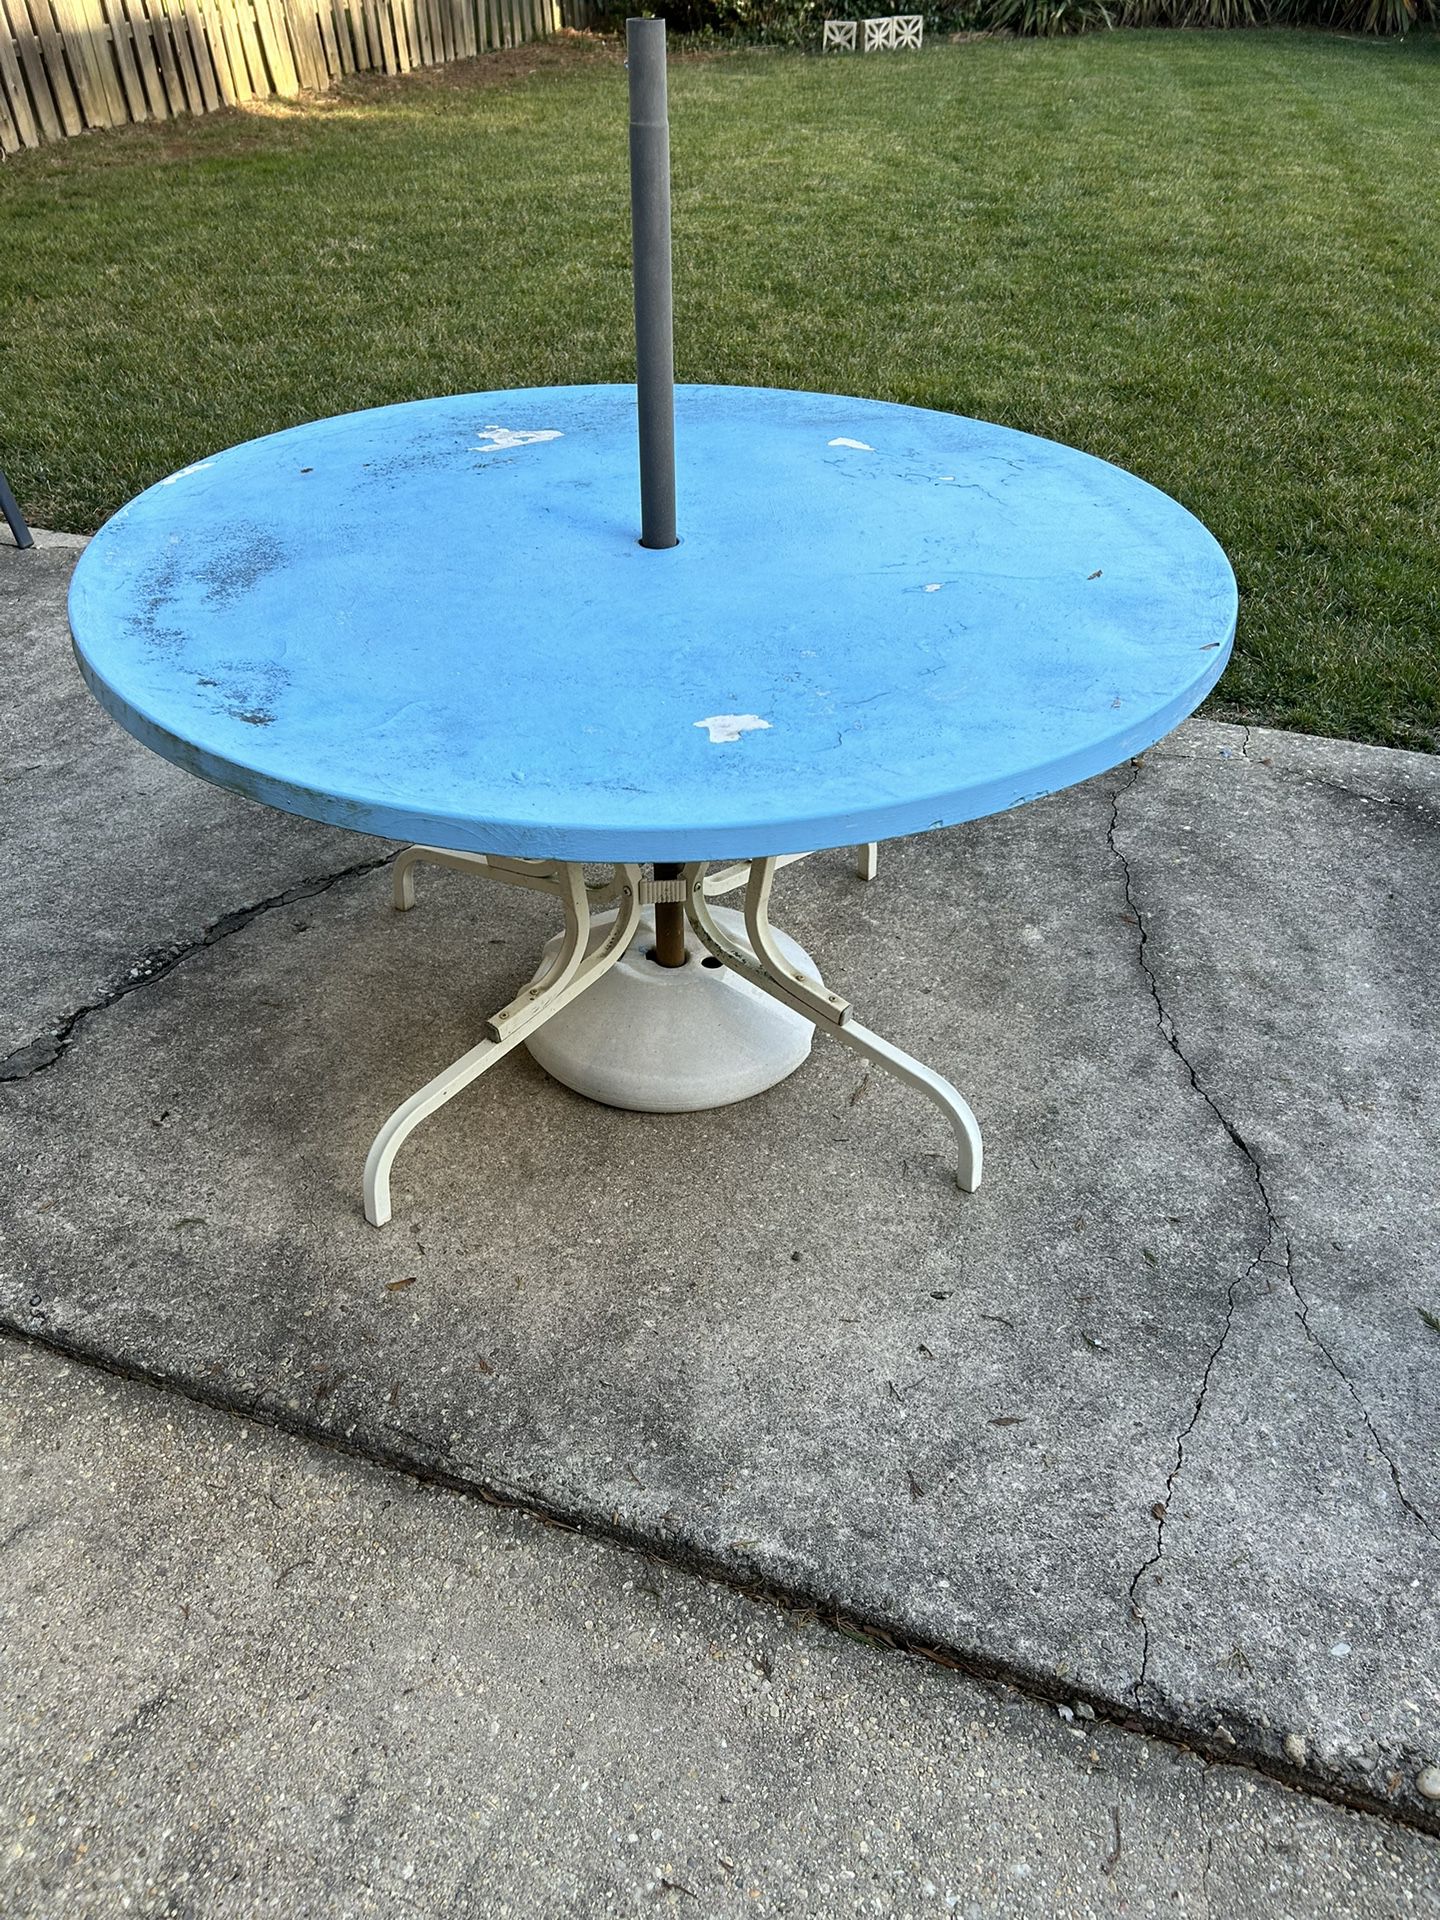 Round Patio Table With Holder For Umbrella, And Umbrella Poles